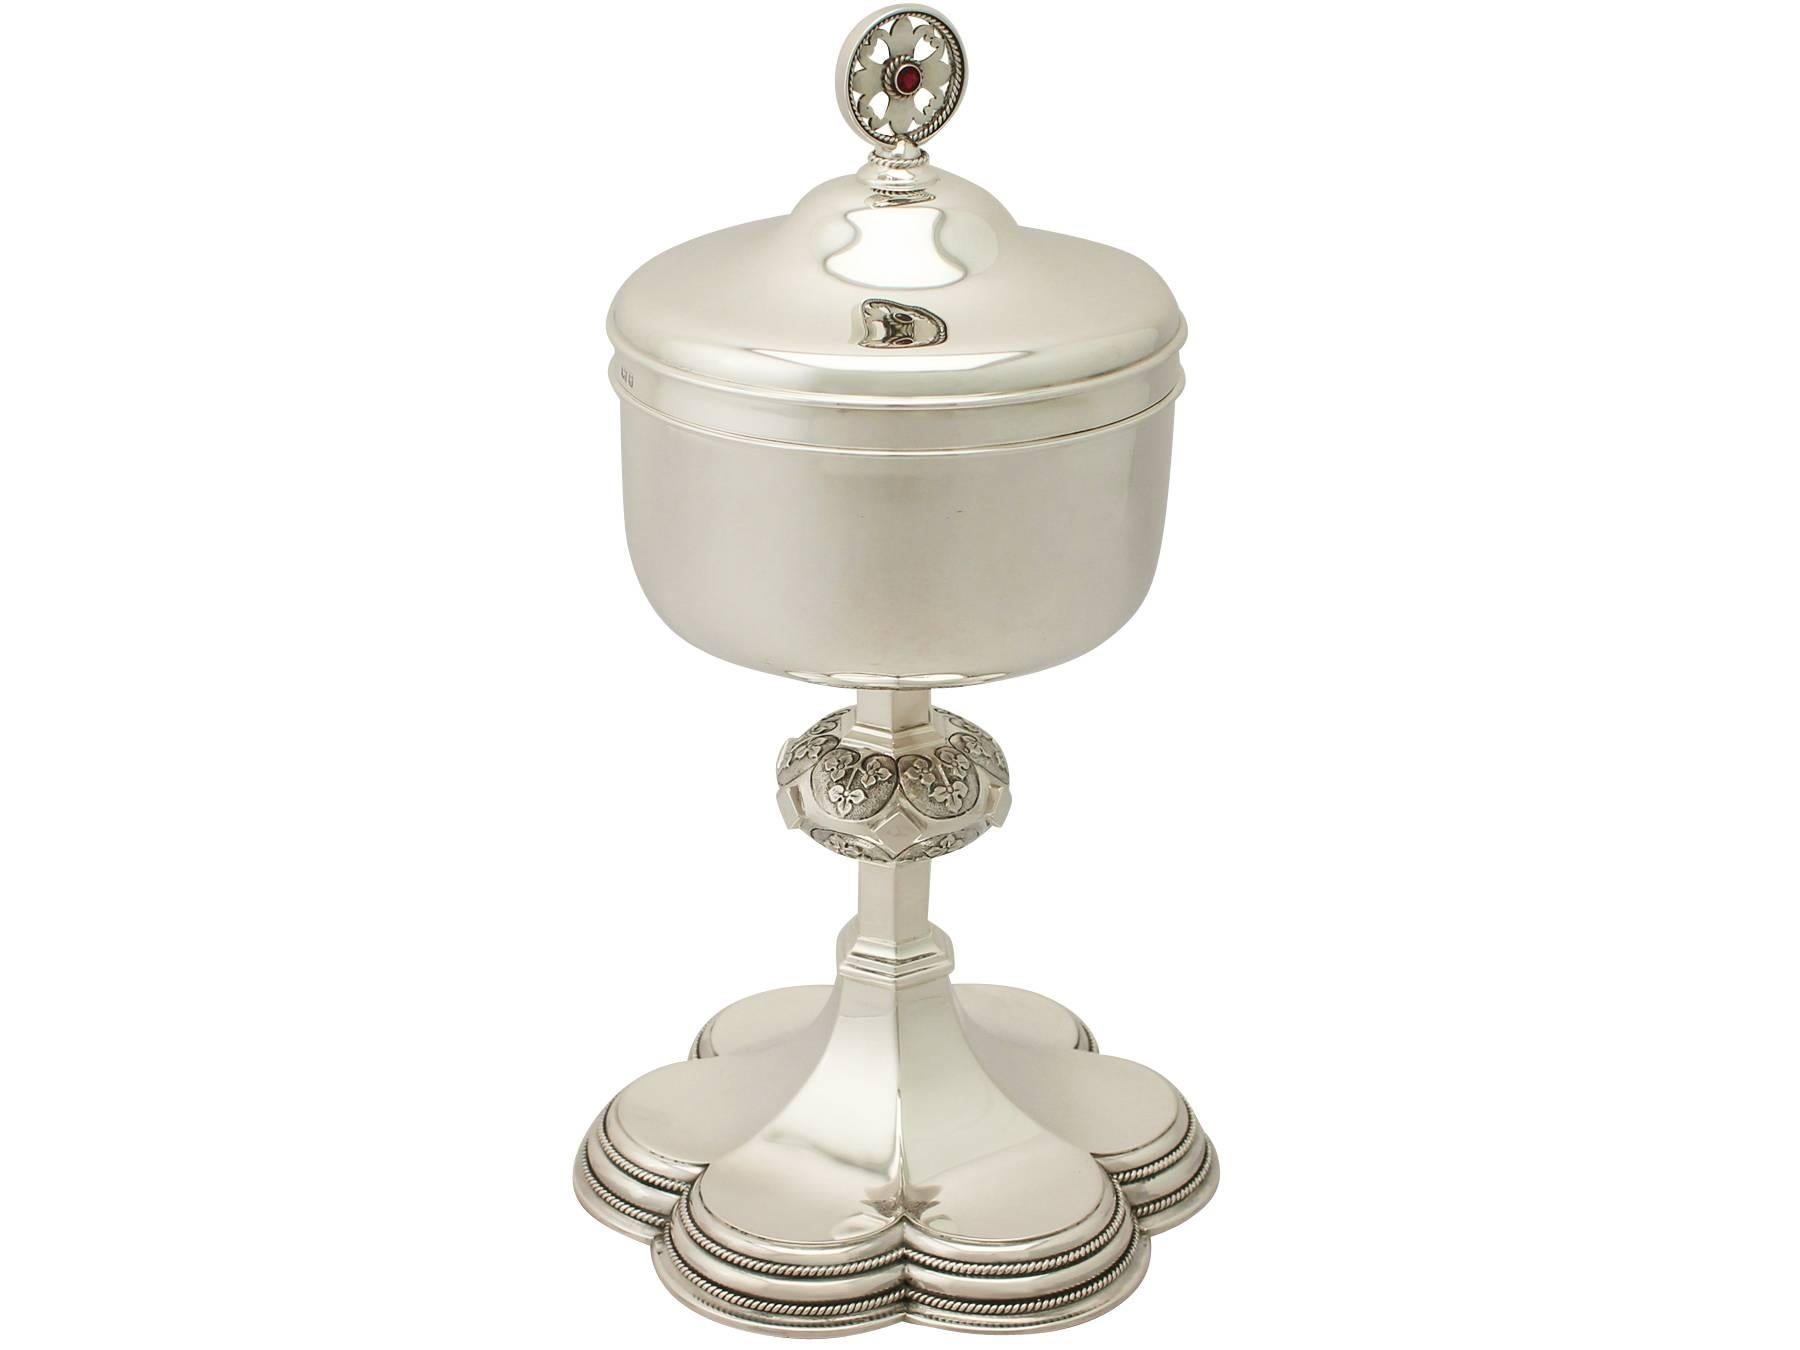 This exceptional vintage Elizabeth II sterling silver ciborium*/ecclesiastical chalice has a circular rounded form onto a circular knop and tapering panelled pedestal to a hexafoil shaped foot.

The surface of this vintage ciborium is plain and